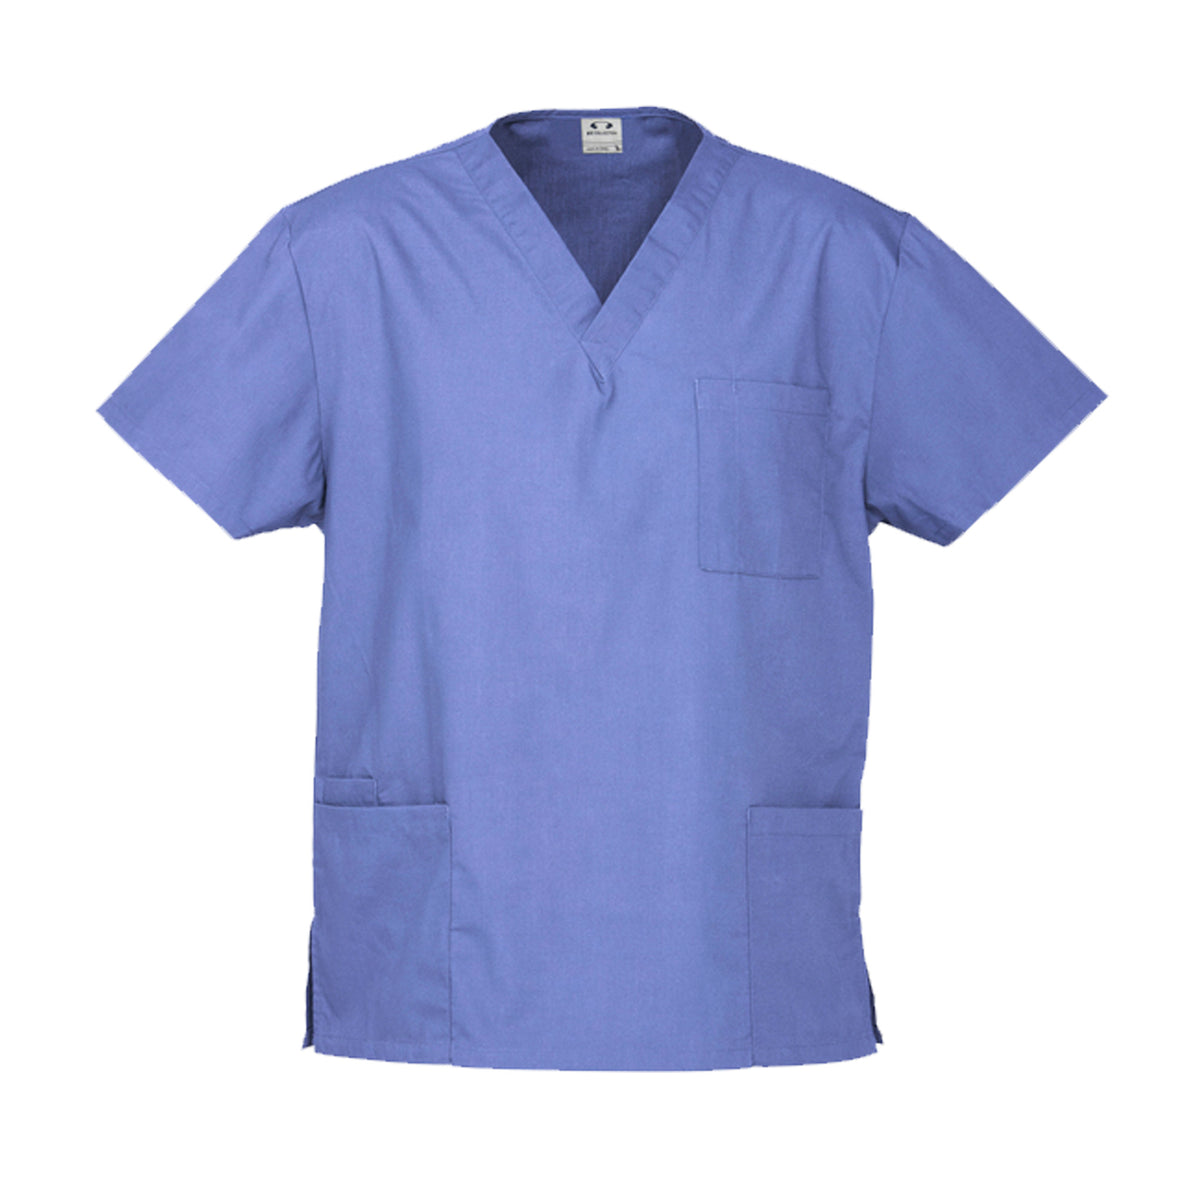 biz collection unisex classic scrubs top in mid blue